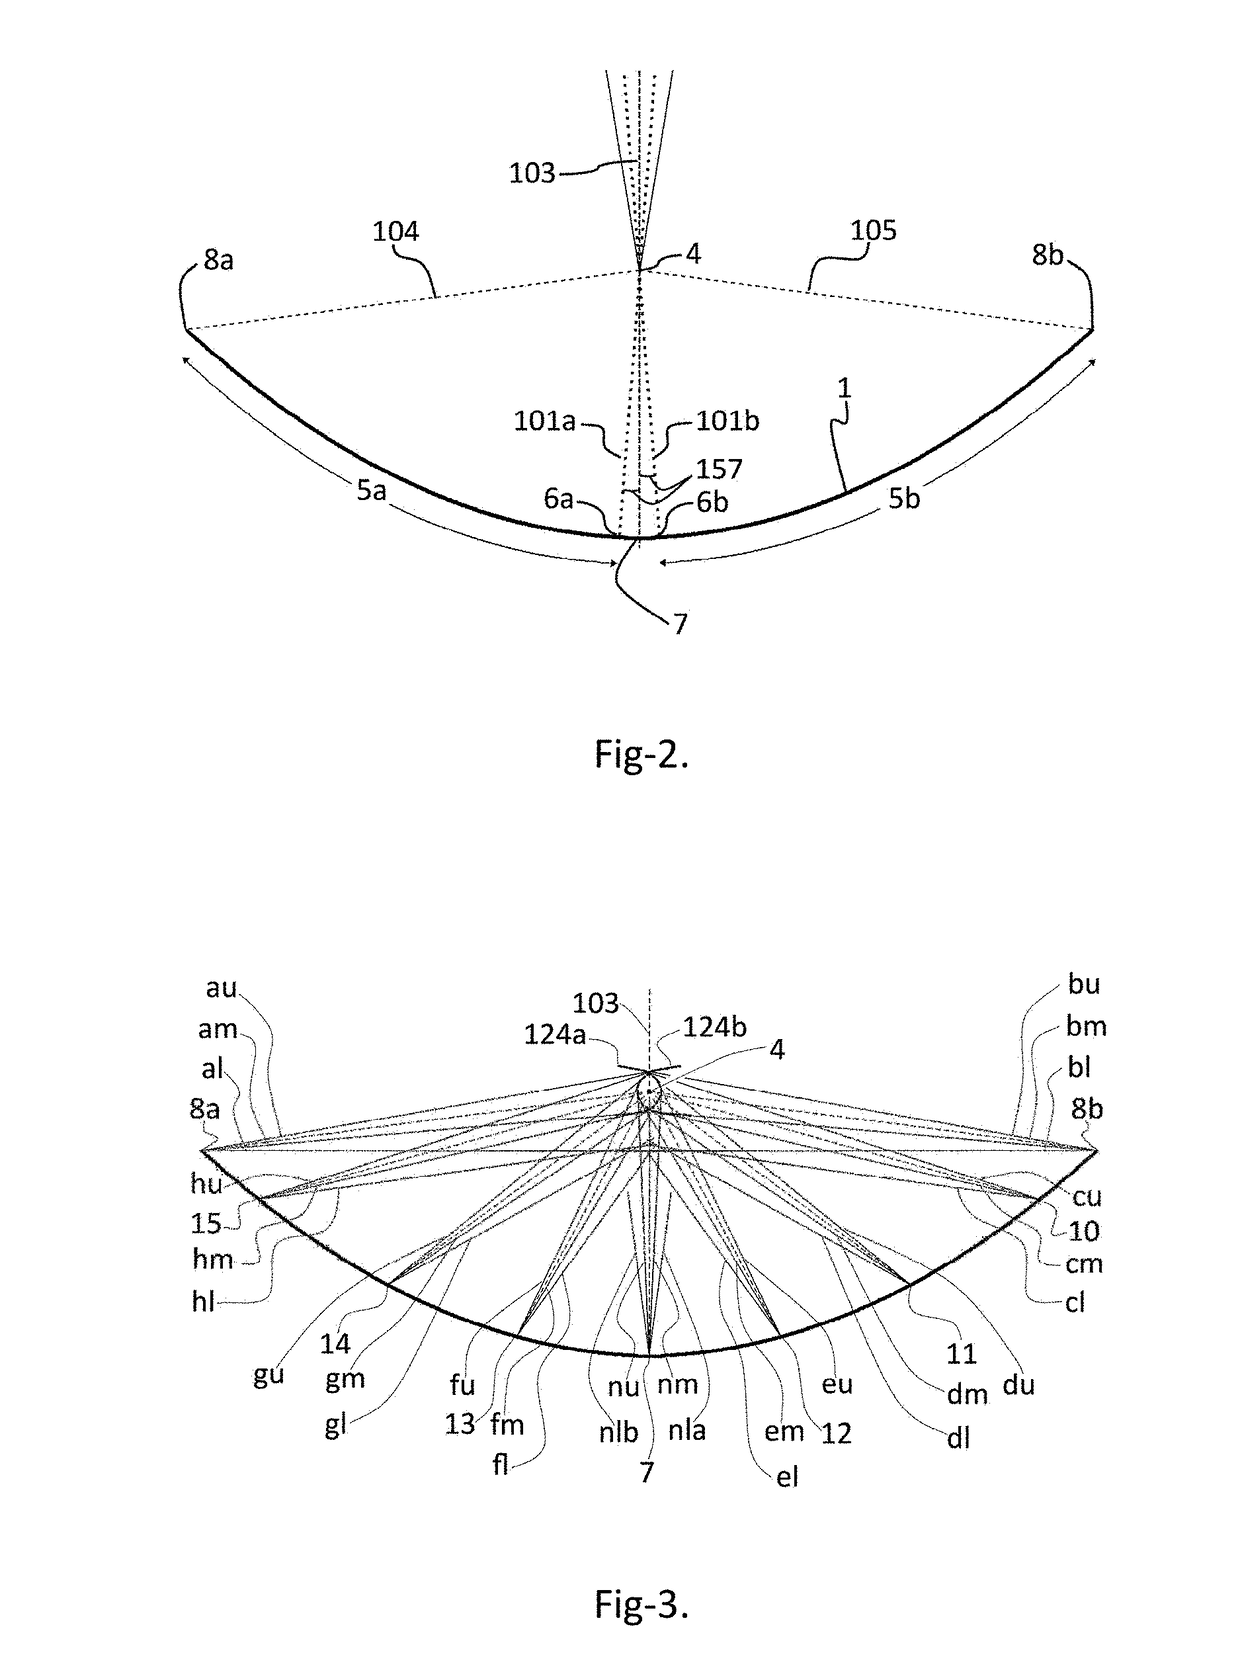 Radiation concentrator incorporating compound confocal uneven parabolic primary reflector, tailored secondary reflector and tailored receiver